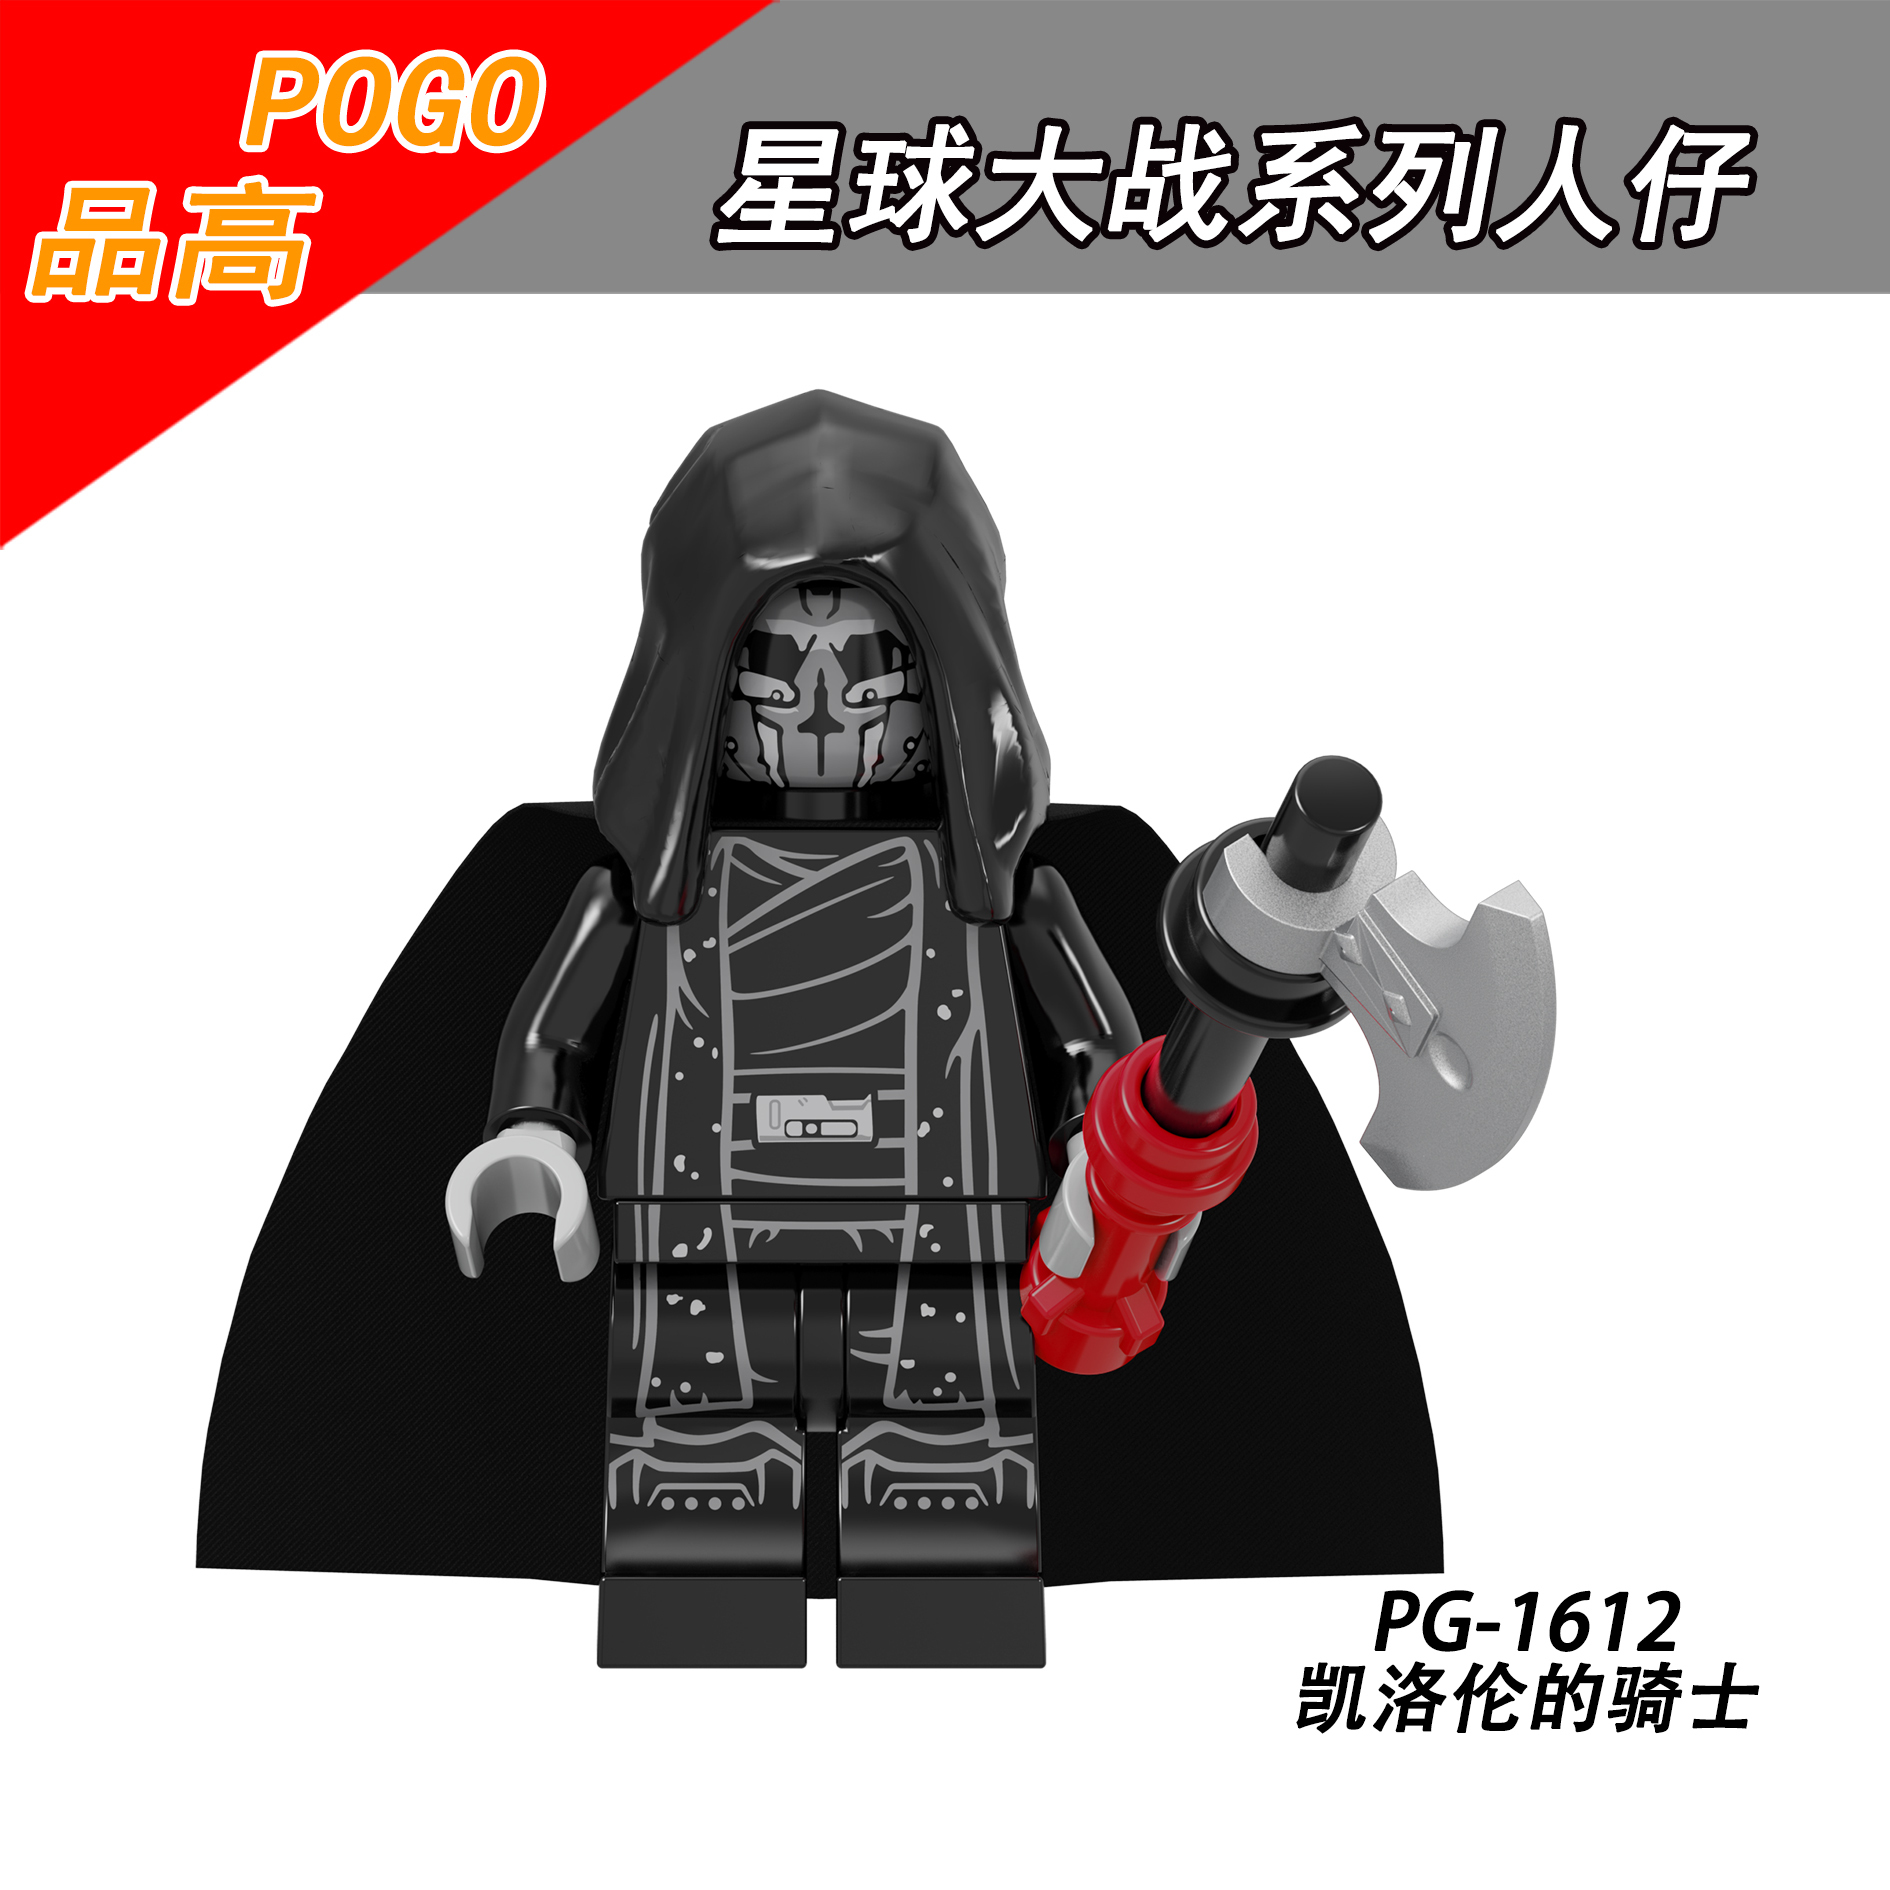 PG1605 PG1606 PG1607 PG1608 PG1609 PG1610 PG1611 PG1612 PG8296 Star Wars Clone Strooper Building Blocks Bricks Movie Series Action Educational Toys for Kids Gifts 